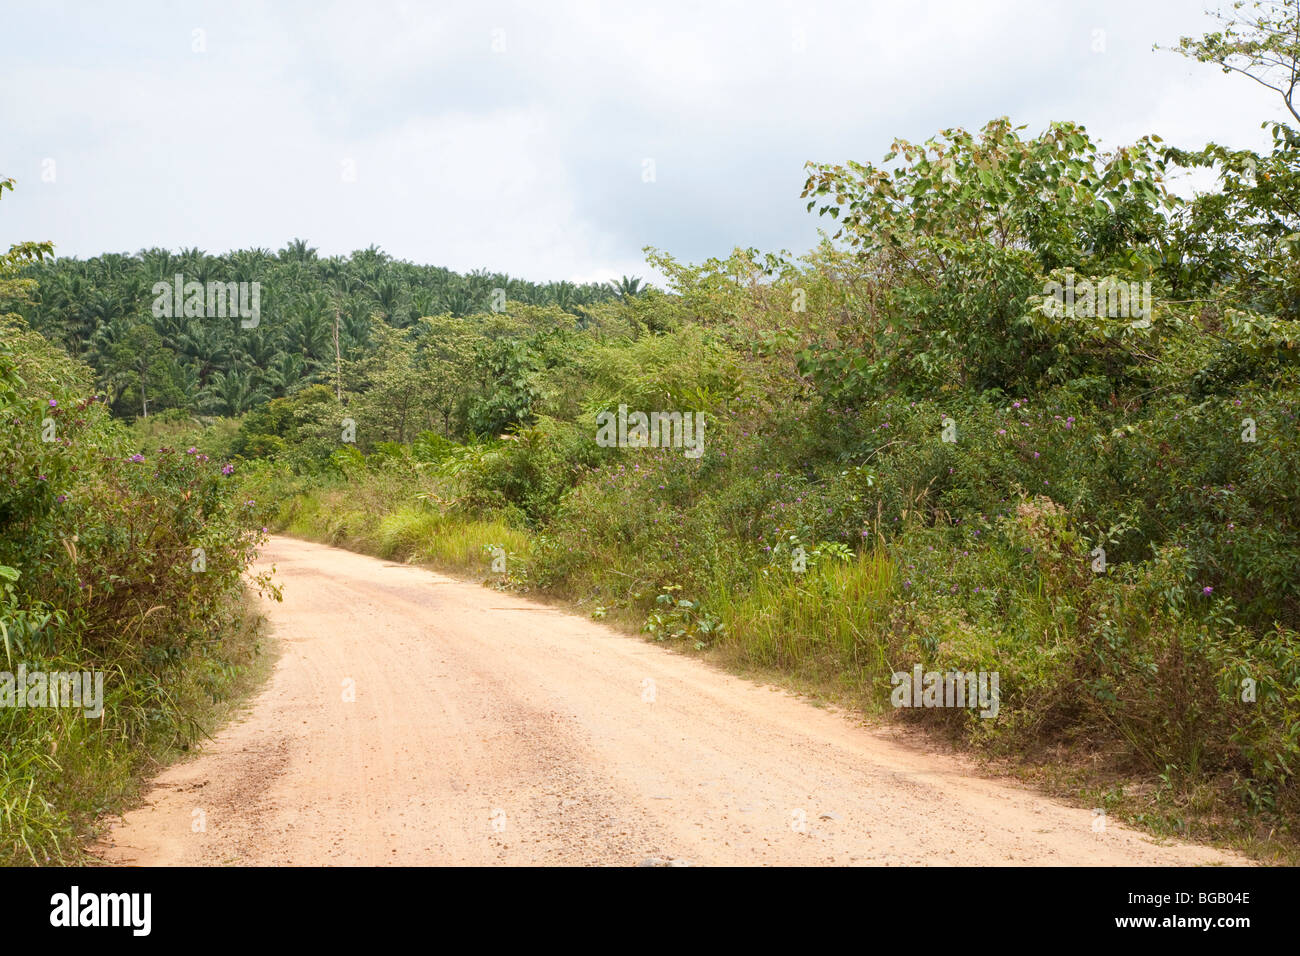 A dirt road going through a forested section on the plantation. Sindora Palm Oil Plantation Stock Photo